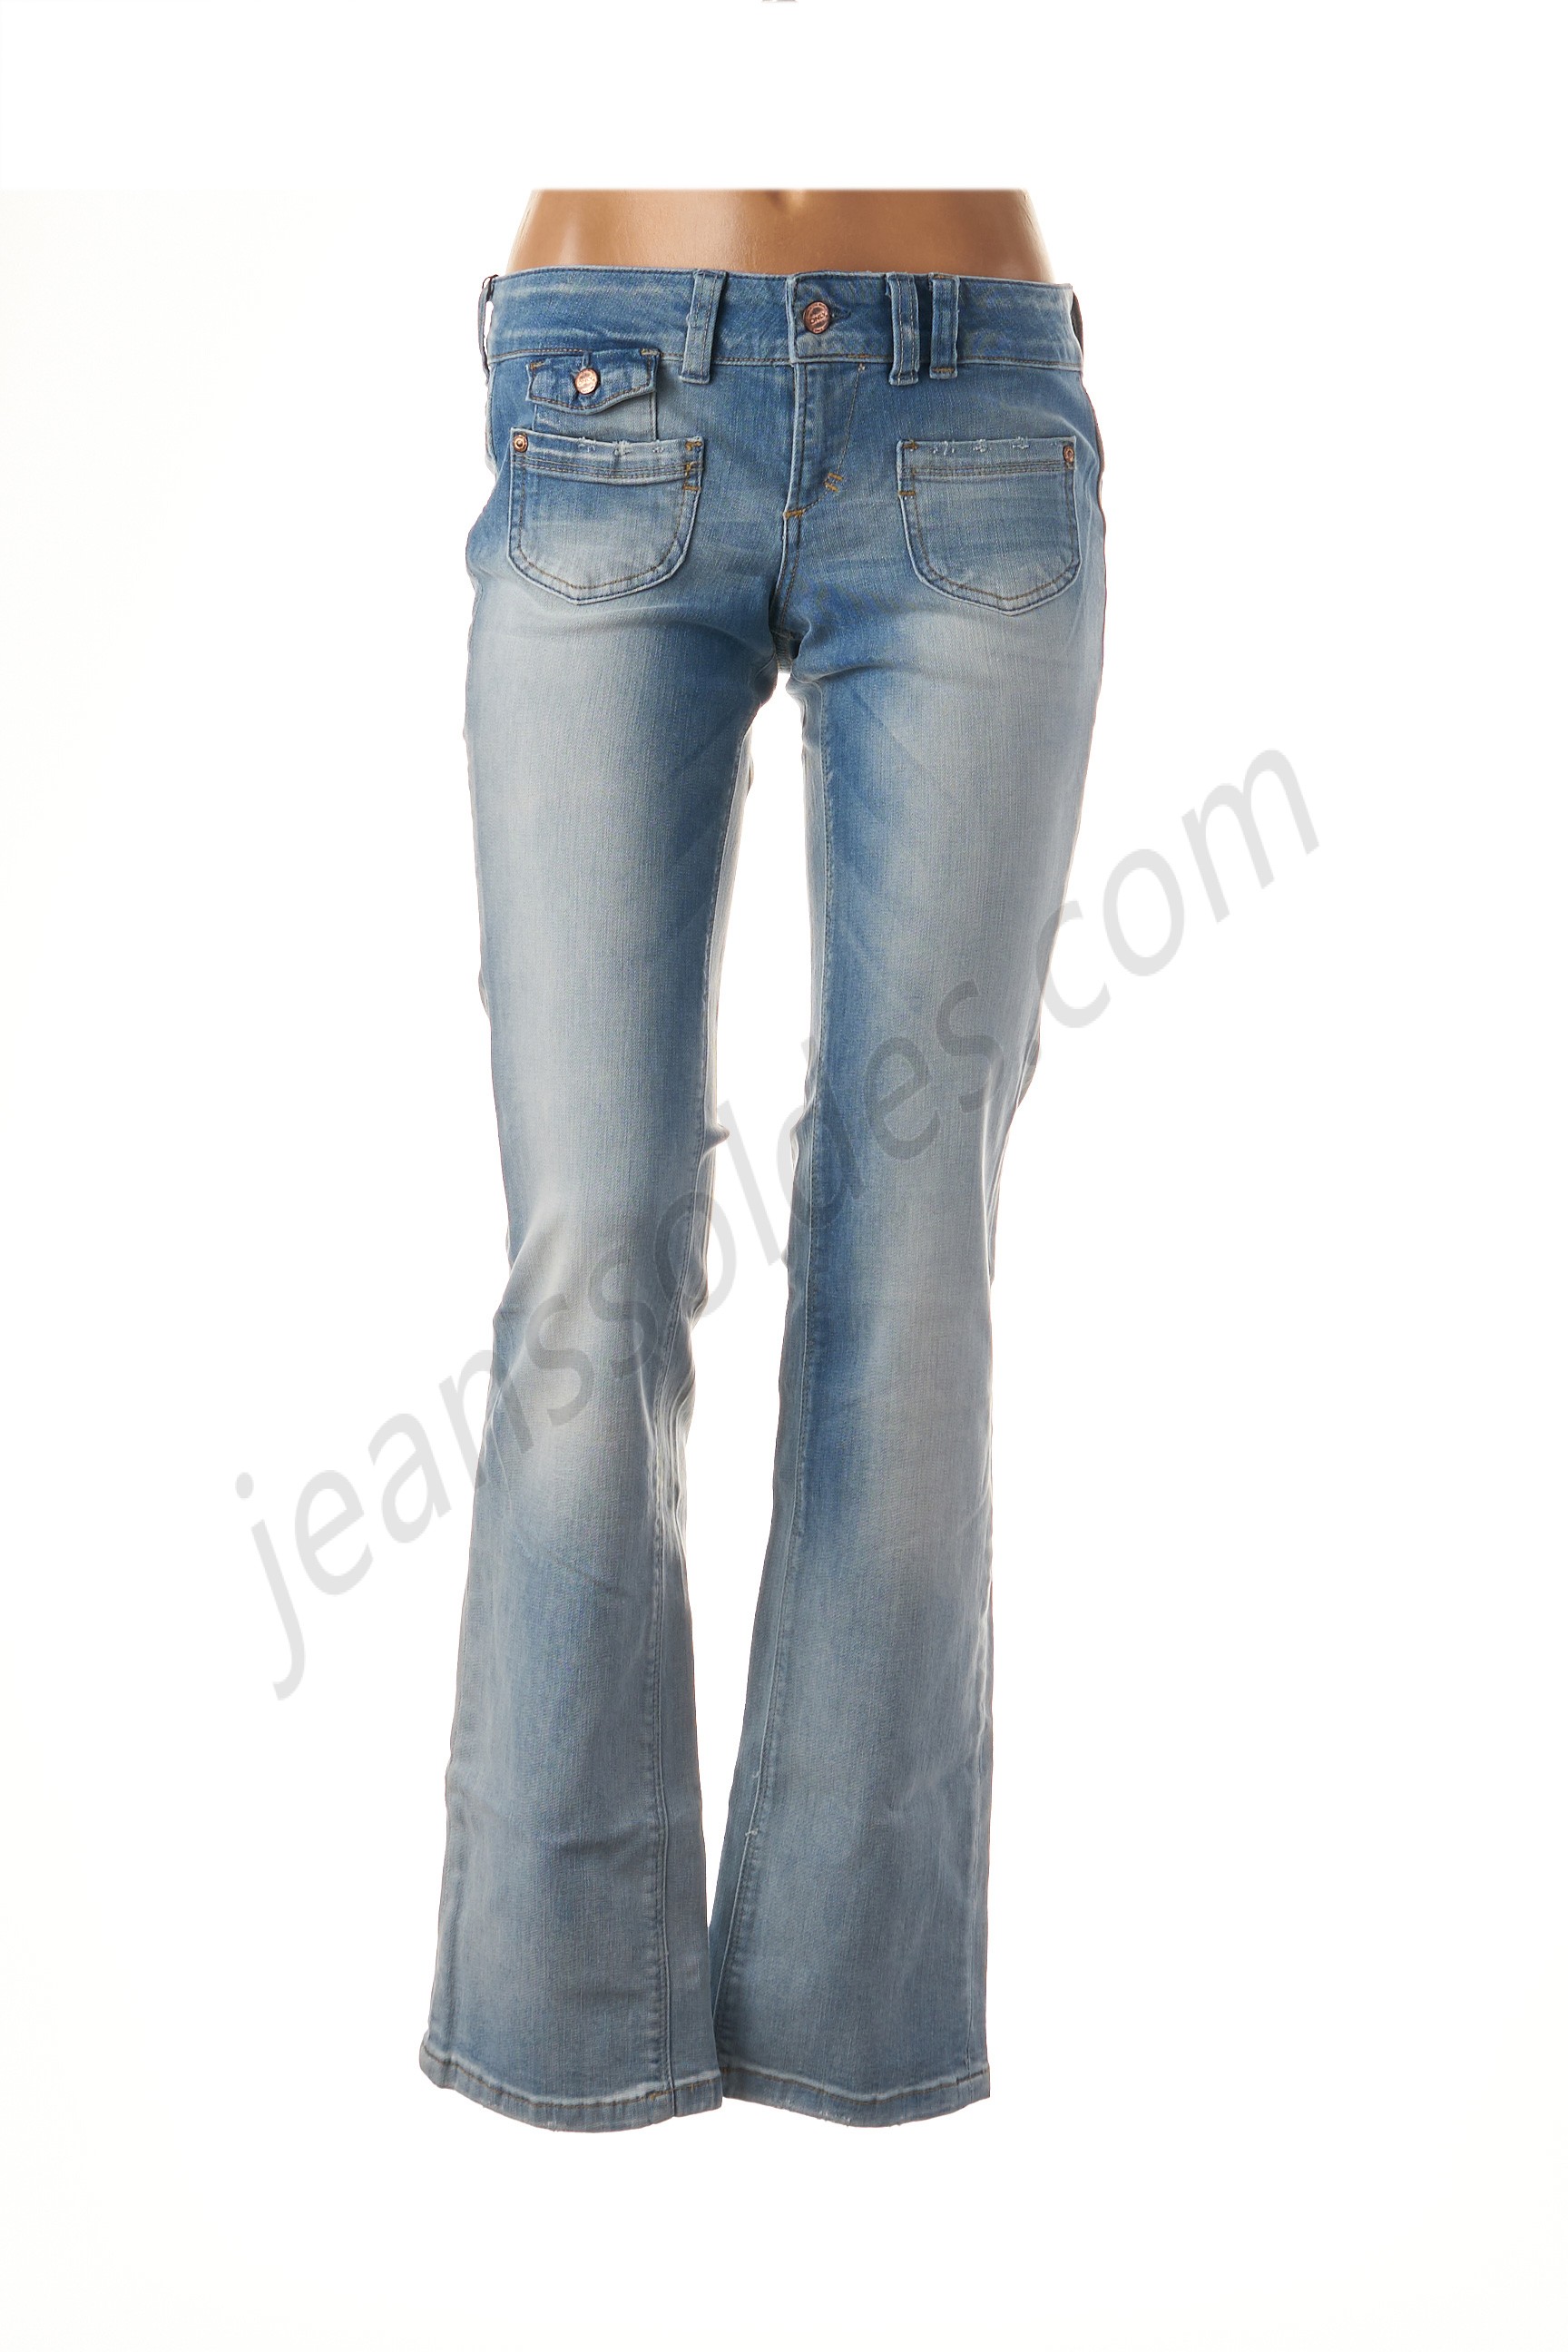 only-Jeans coupe droite prix d’amis - only-Jeans coupe droite prix d’amis